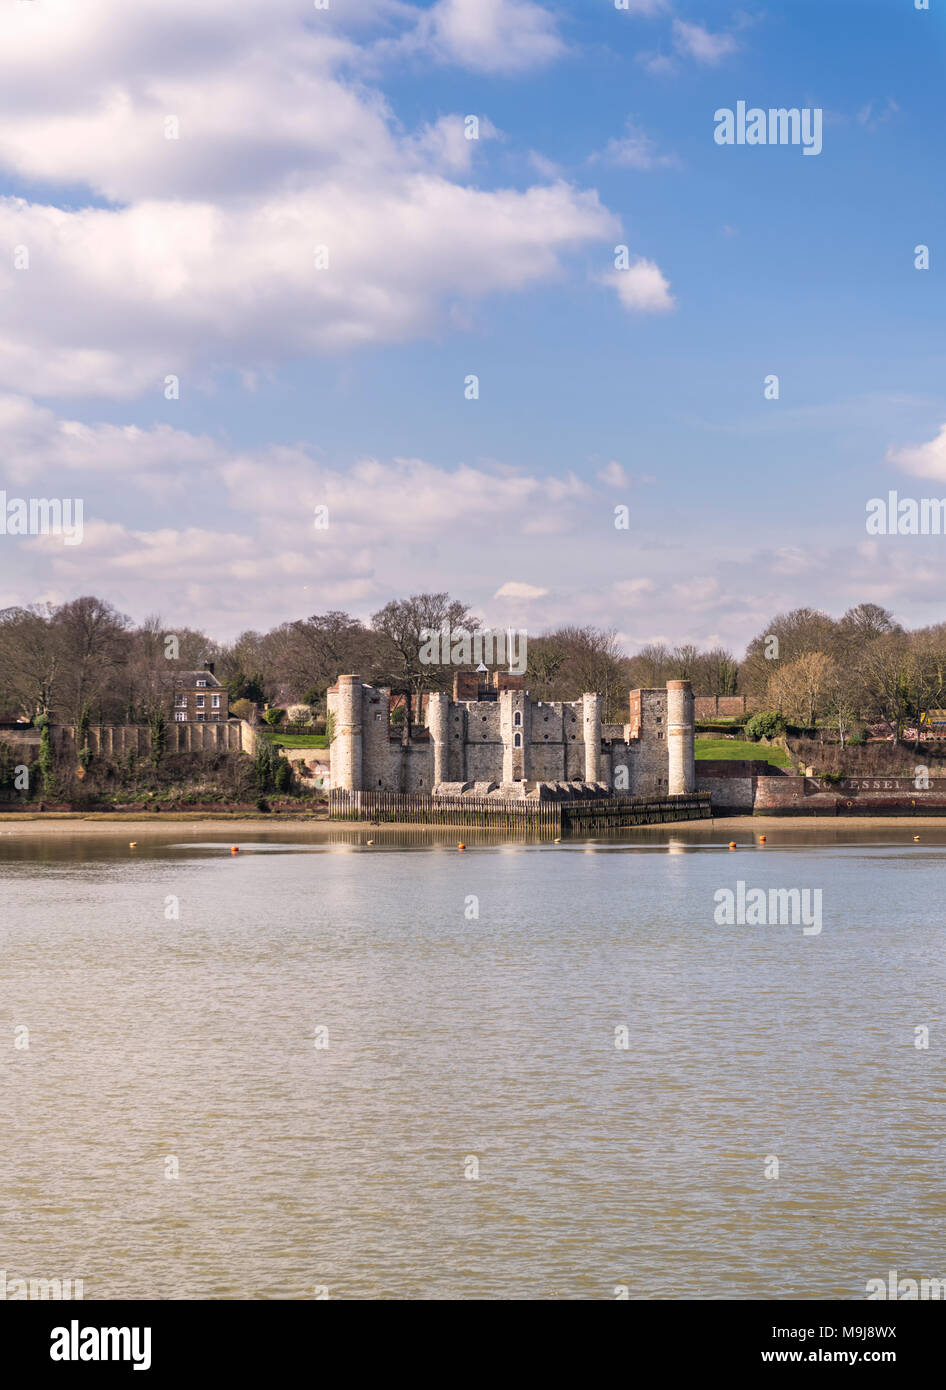 Upnor castle, a 16th century fortification situated on the river Medway at Chatham, Kent Stock Photo